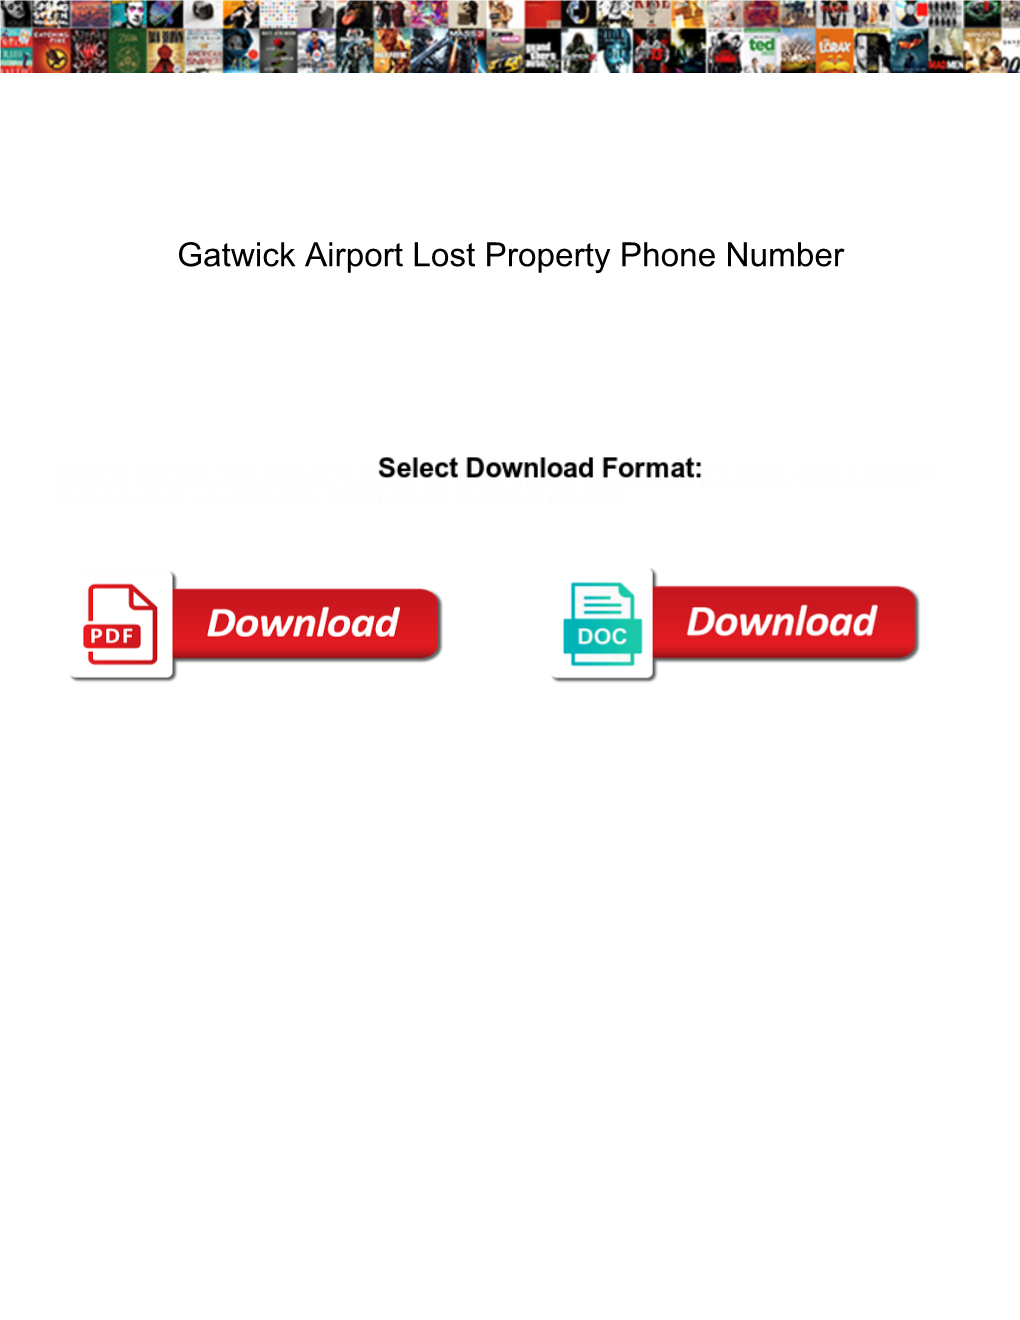 Gatwick Airport Lost Property Phone Number